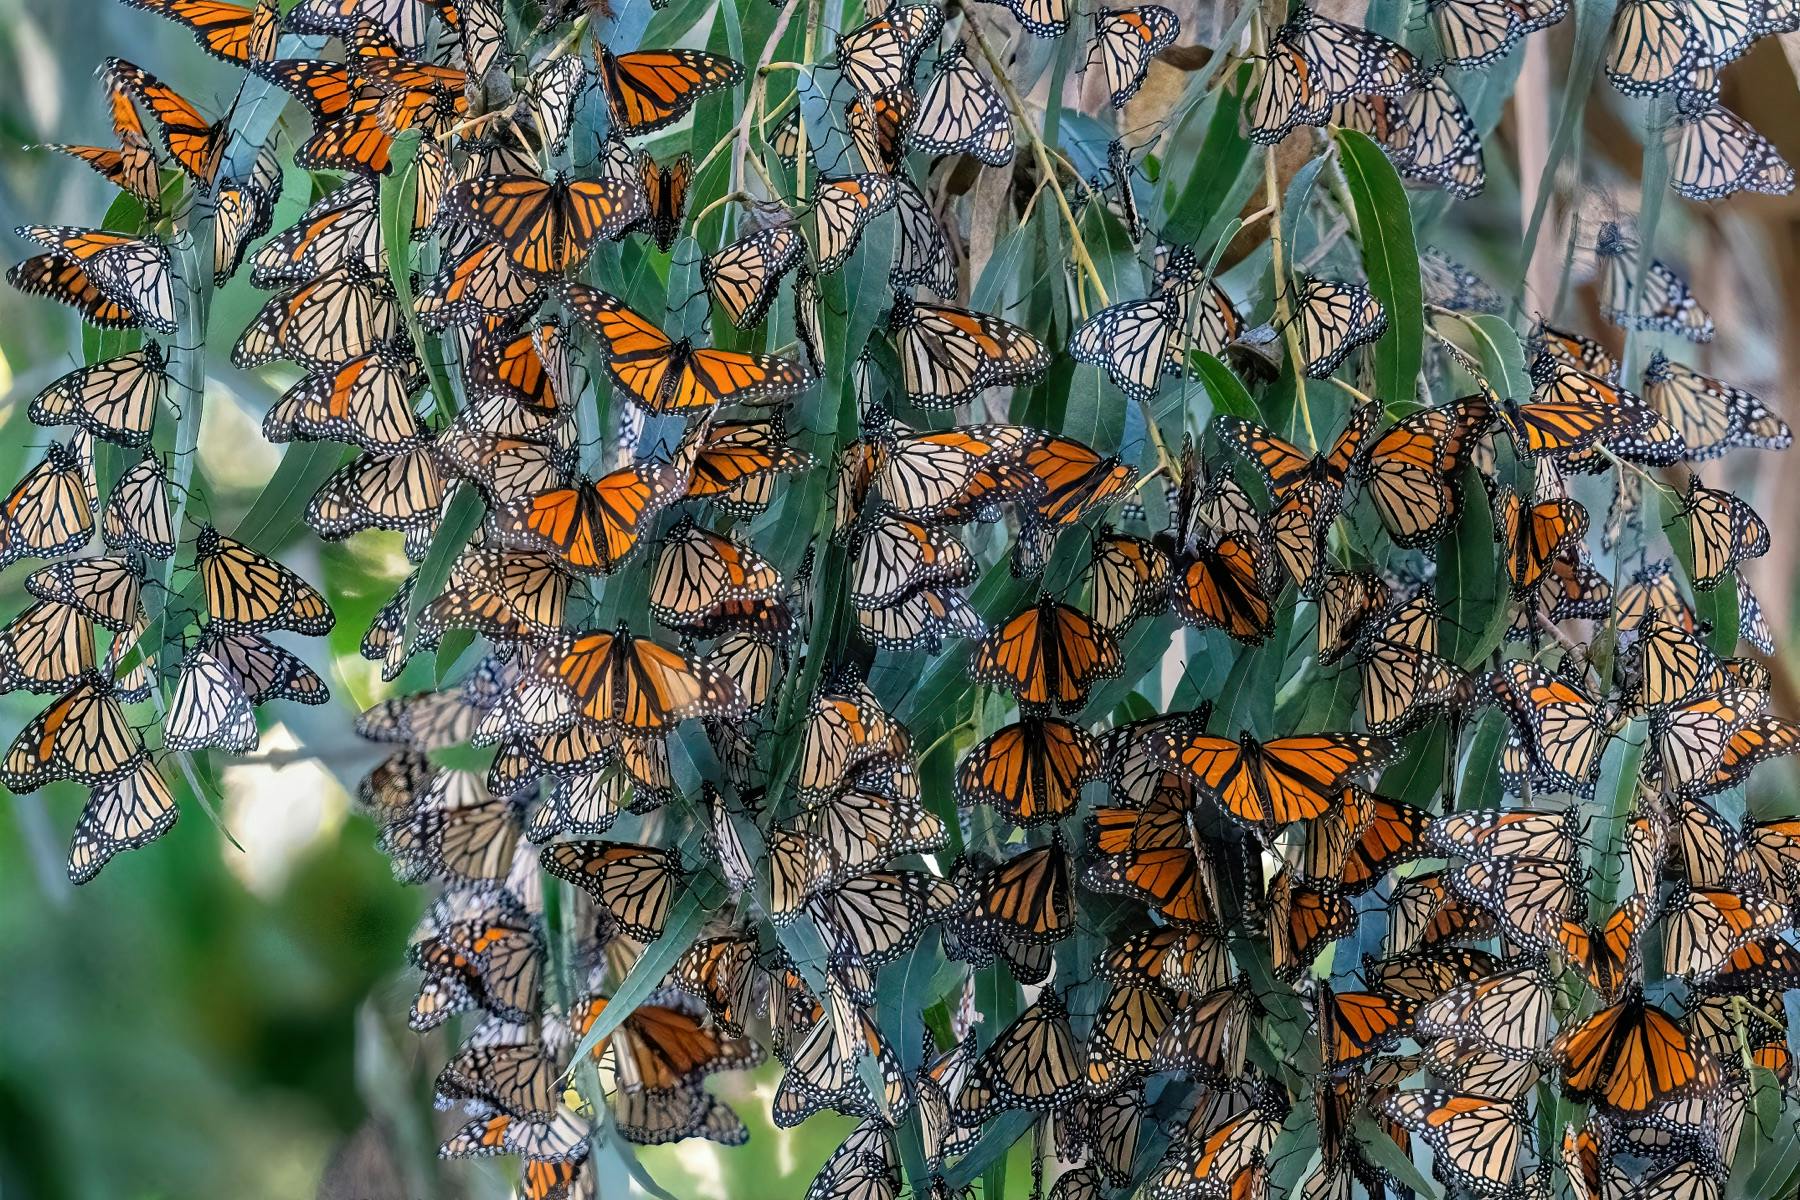 A cluster of monarchs on a eucalyptus